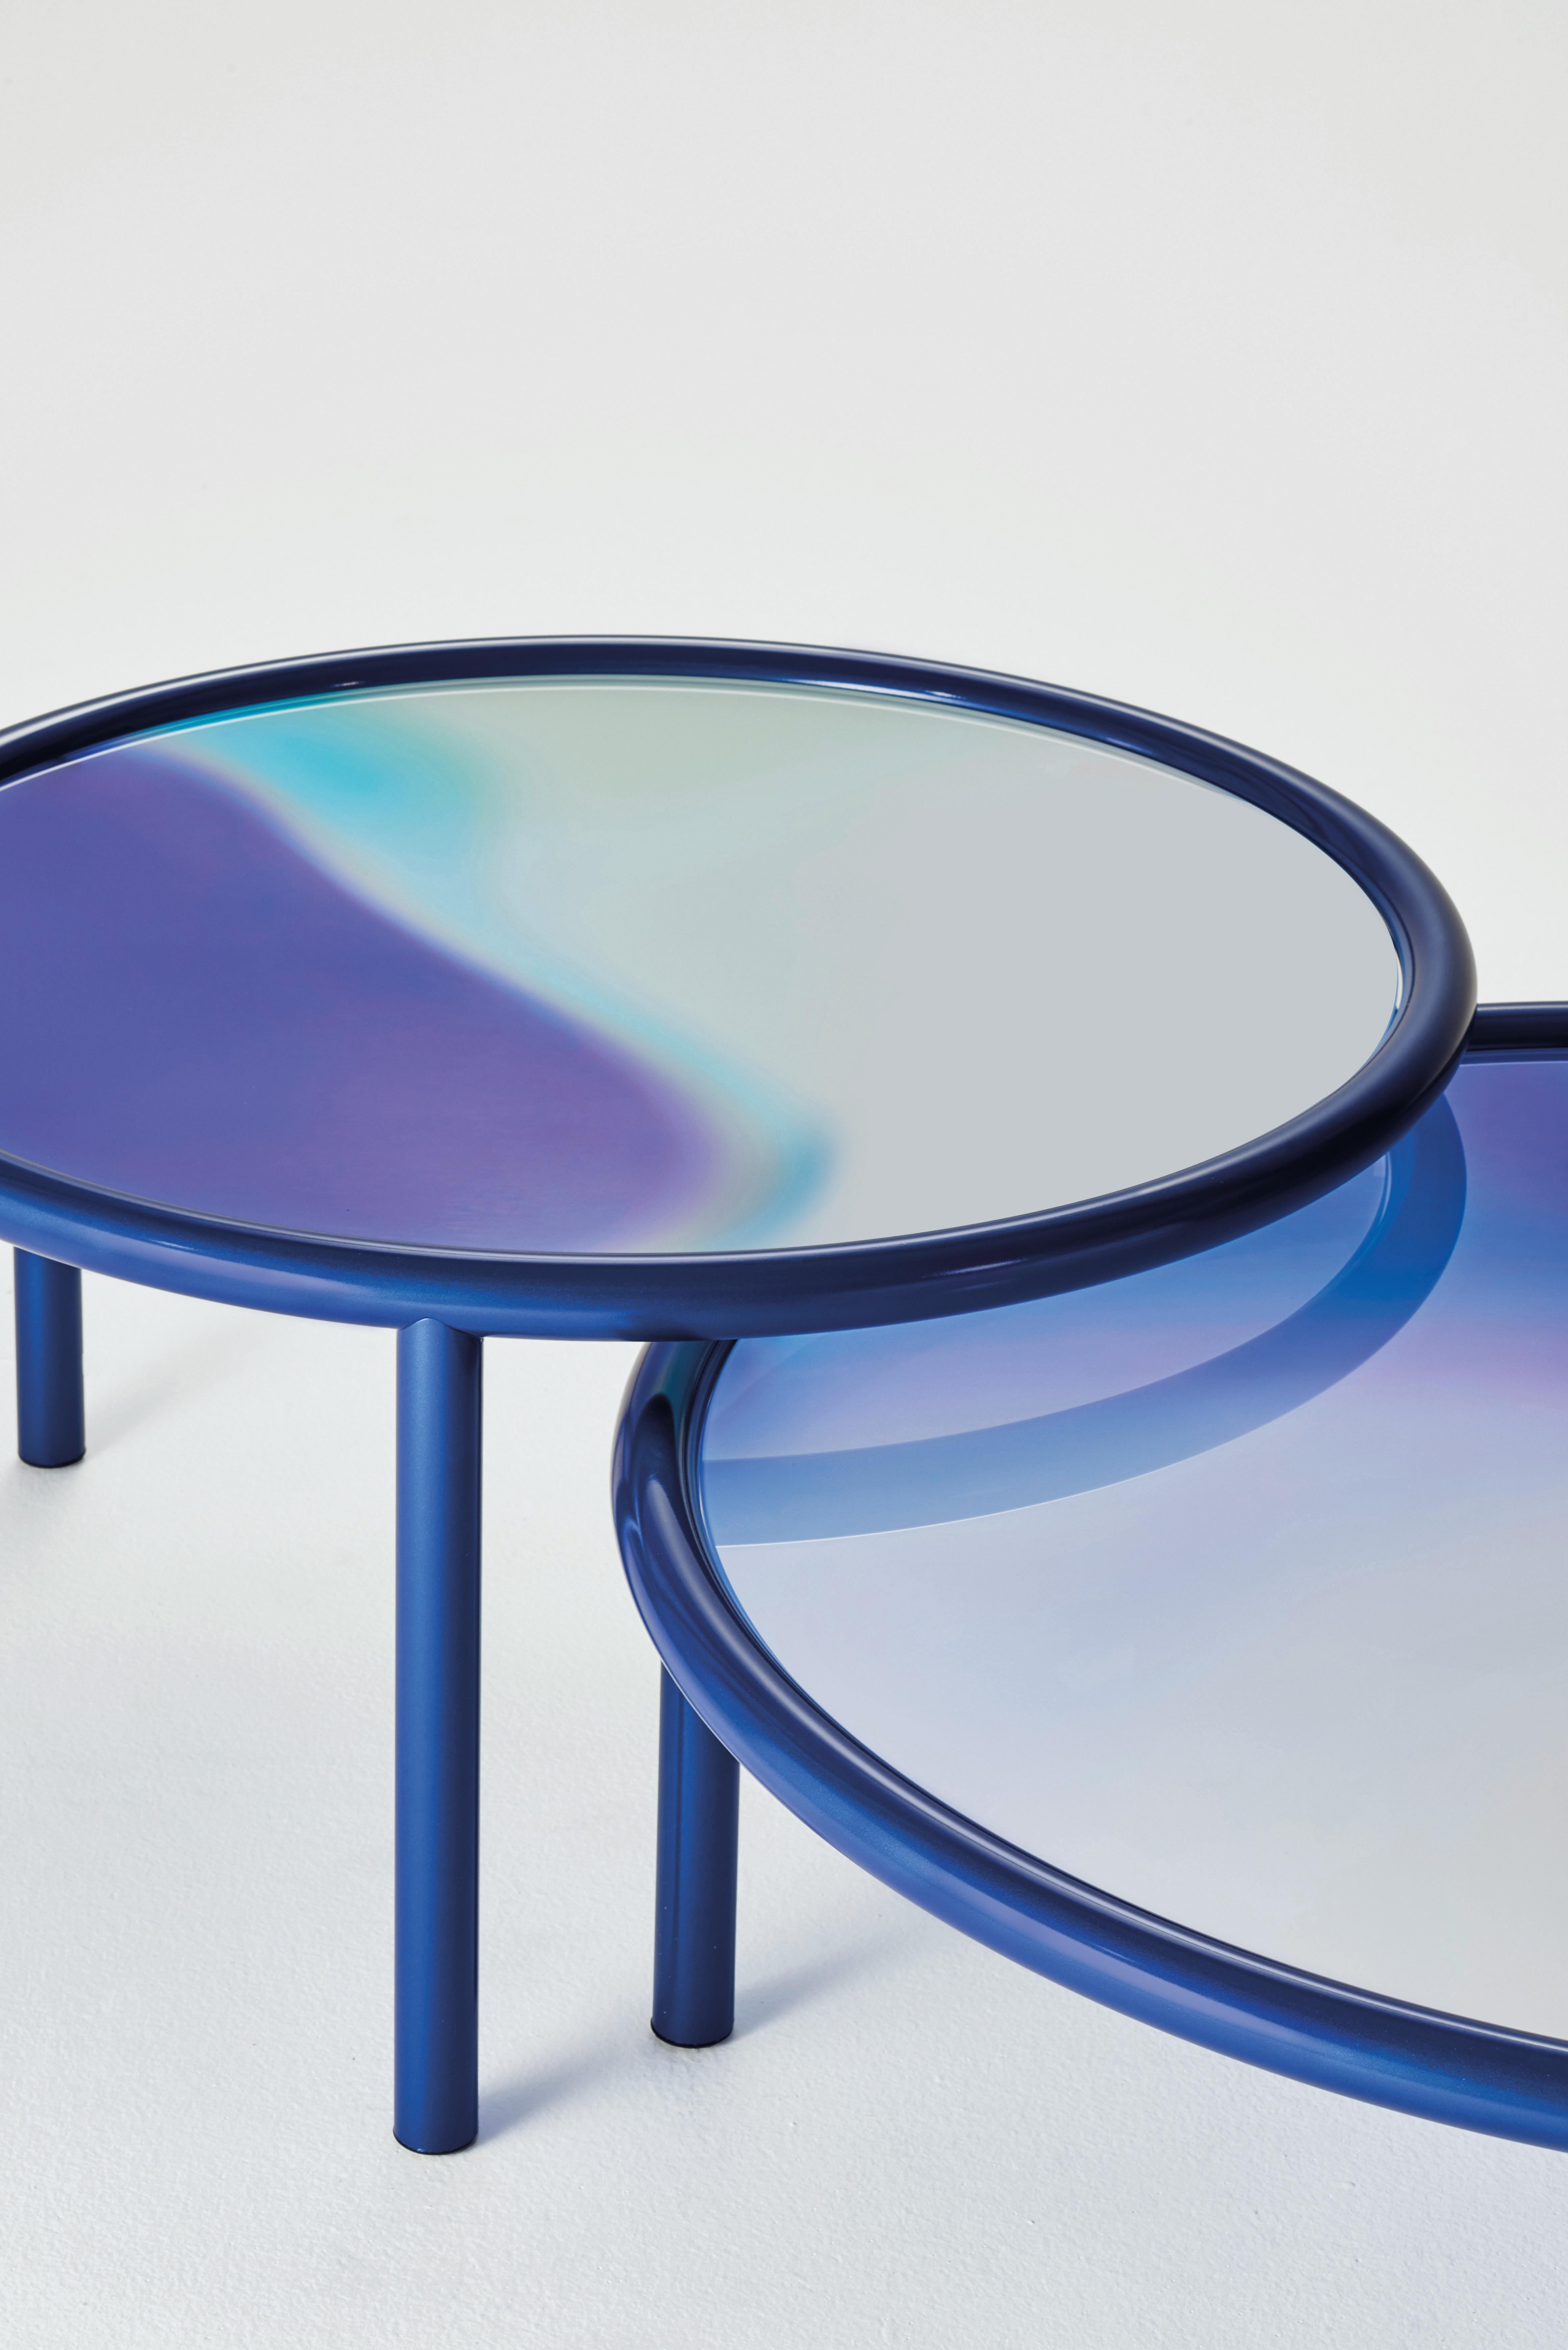 Low round tables with tubular metal structure painted midnight blue or copper colour in a special metallic opaque finish. The top, in laminated glass, is a palette of colors on a mirrored background, blending and mixing with one another like gas or